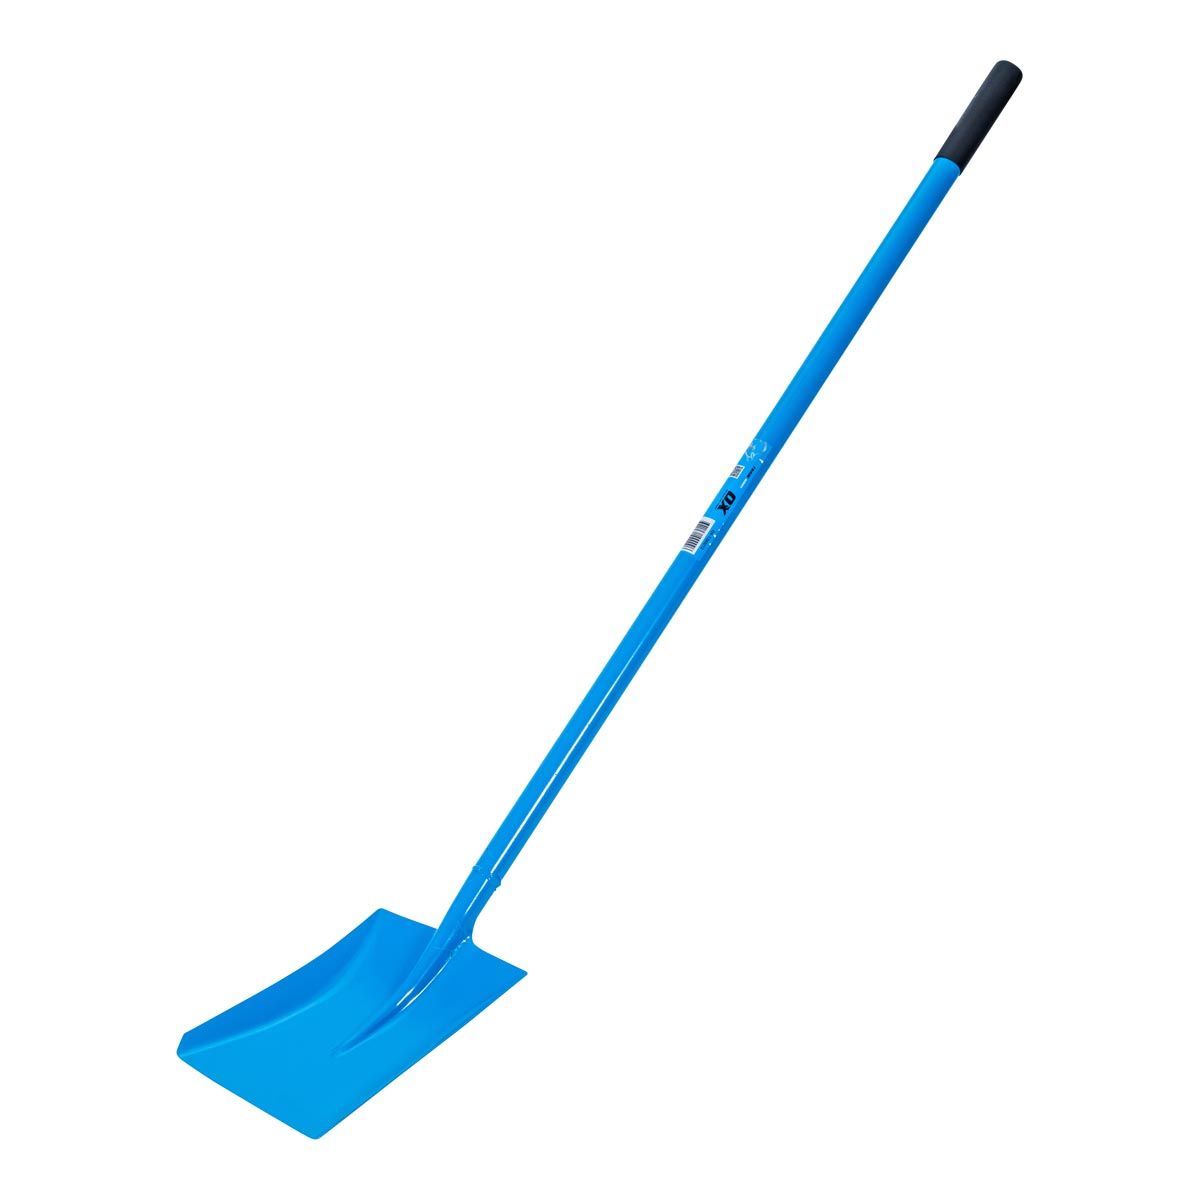 Square Mouth Long Handle Shovel OX-T280212 by Ox